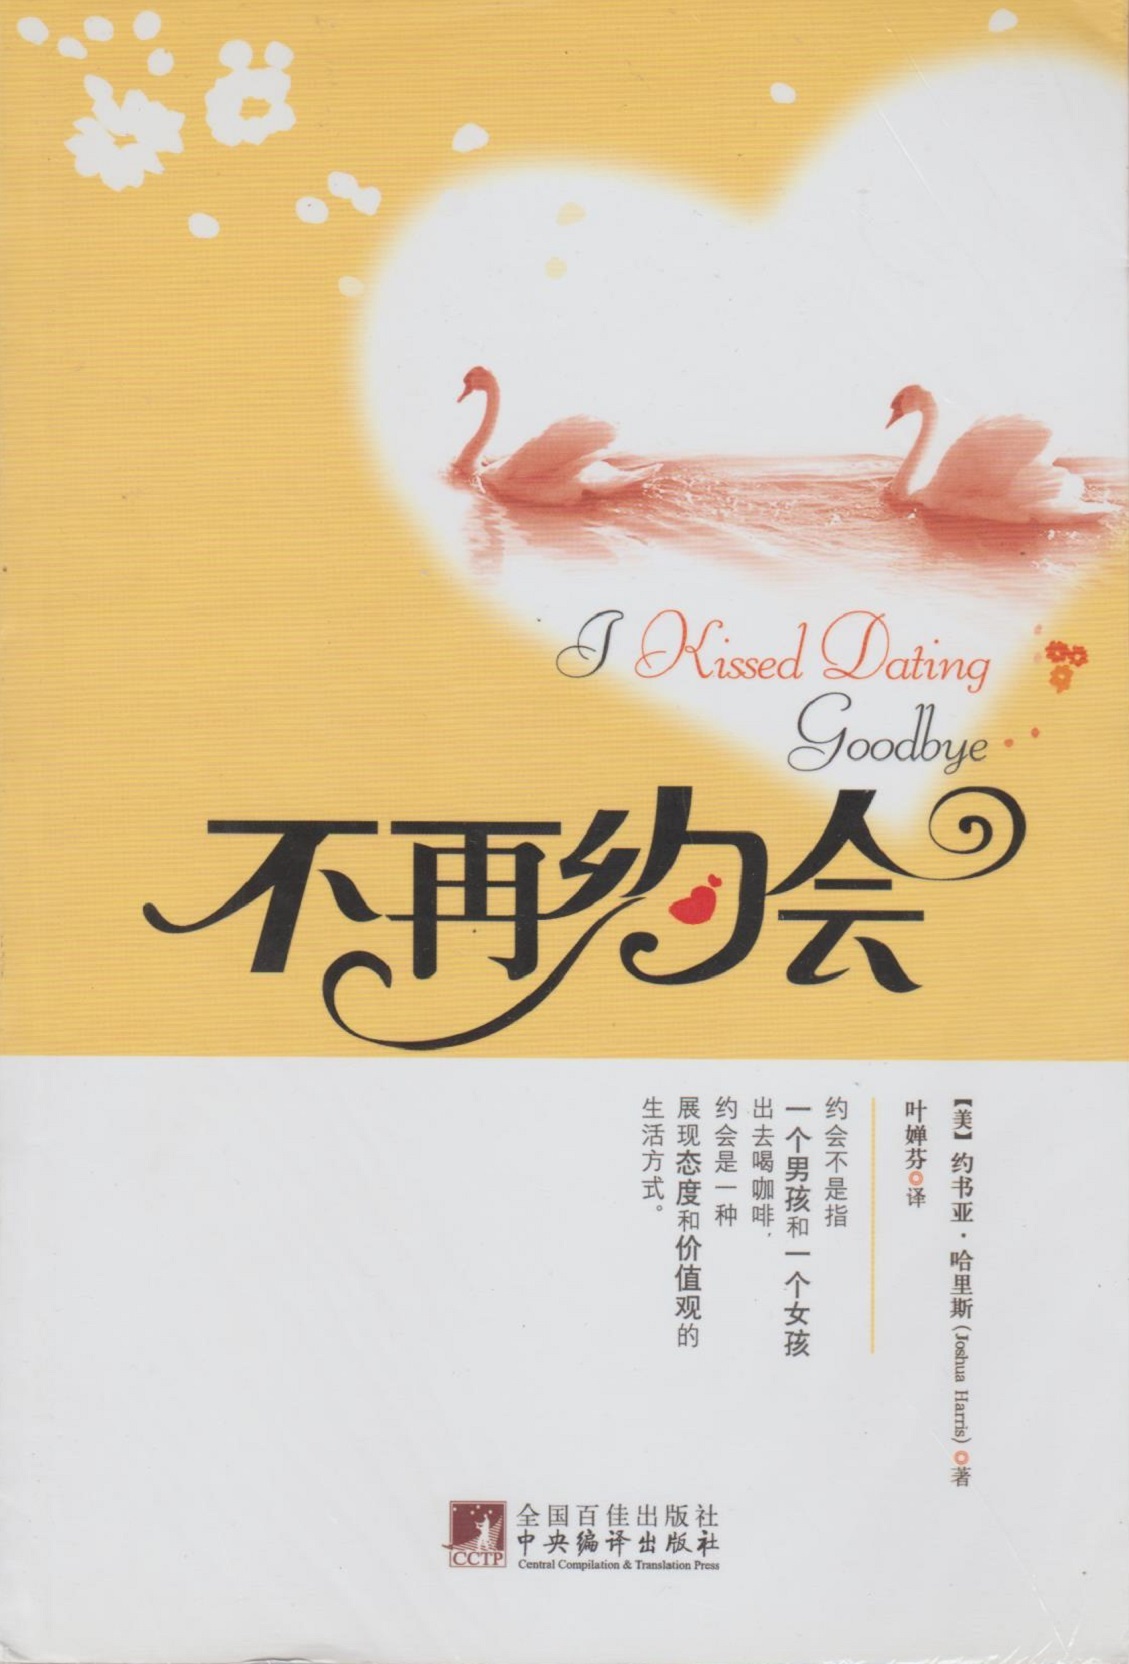 Dating in kissed Haikou goodbye i The Bestsellers: